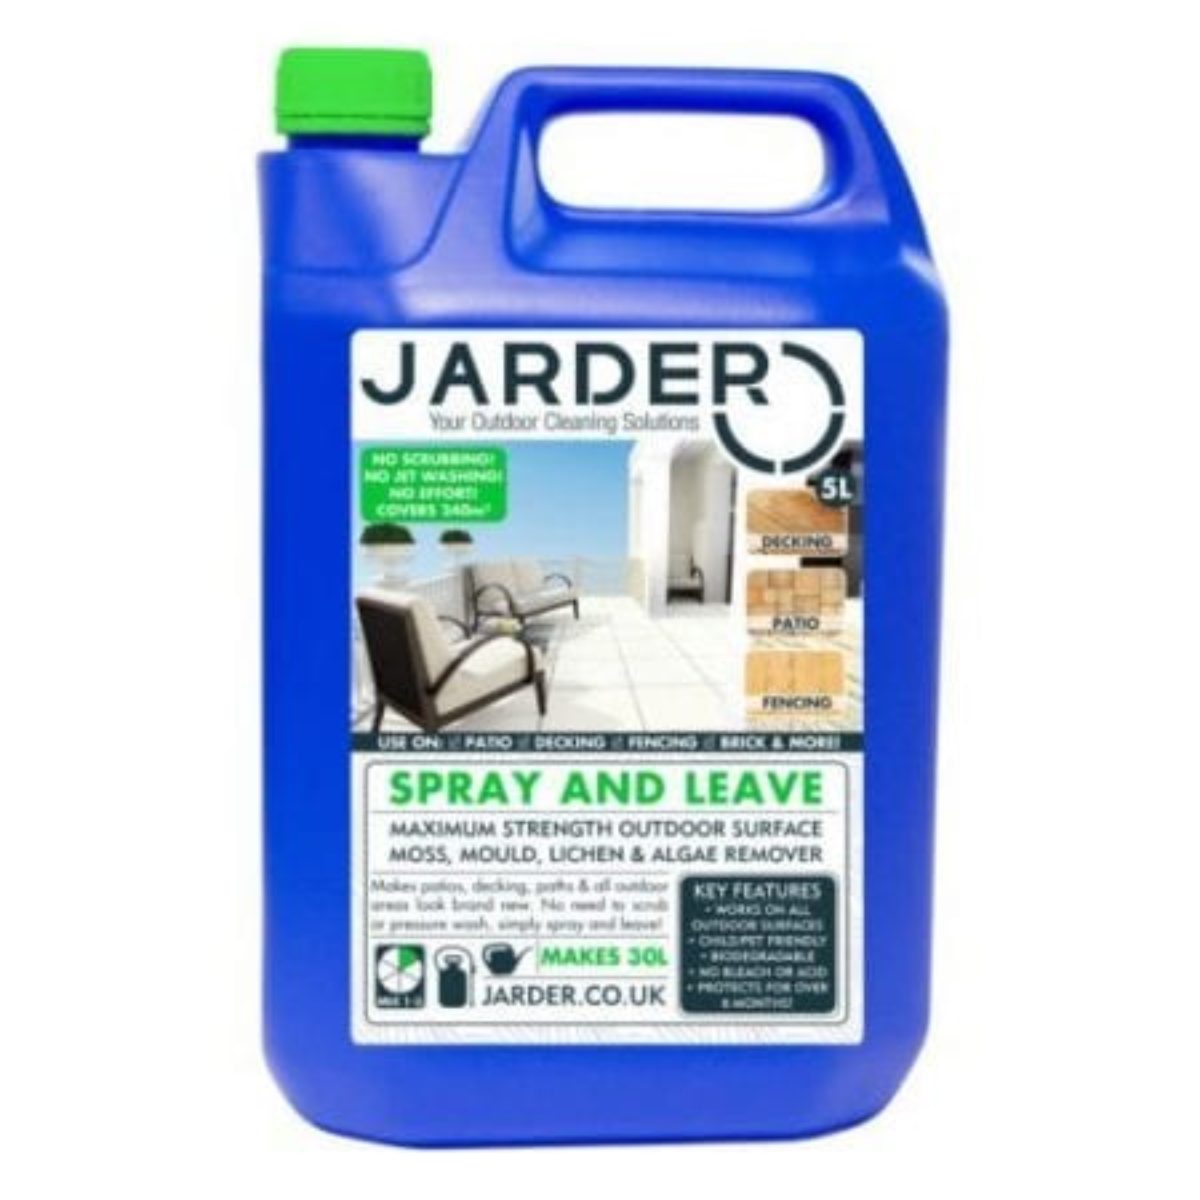 10 Best Patio Cleaner Reviews The Top Rated Models In 2020 throughout proportions 1200 X 1200